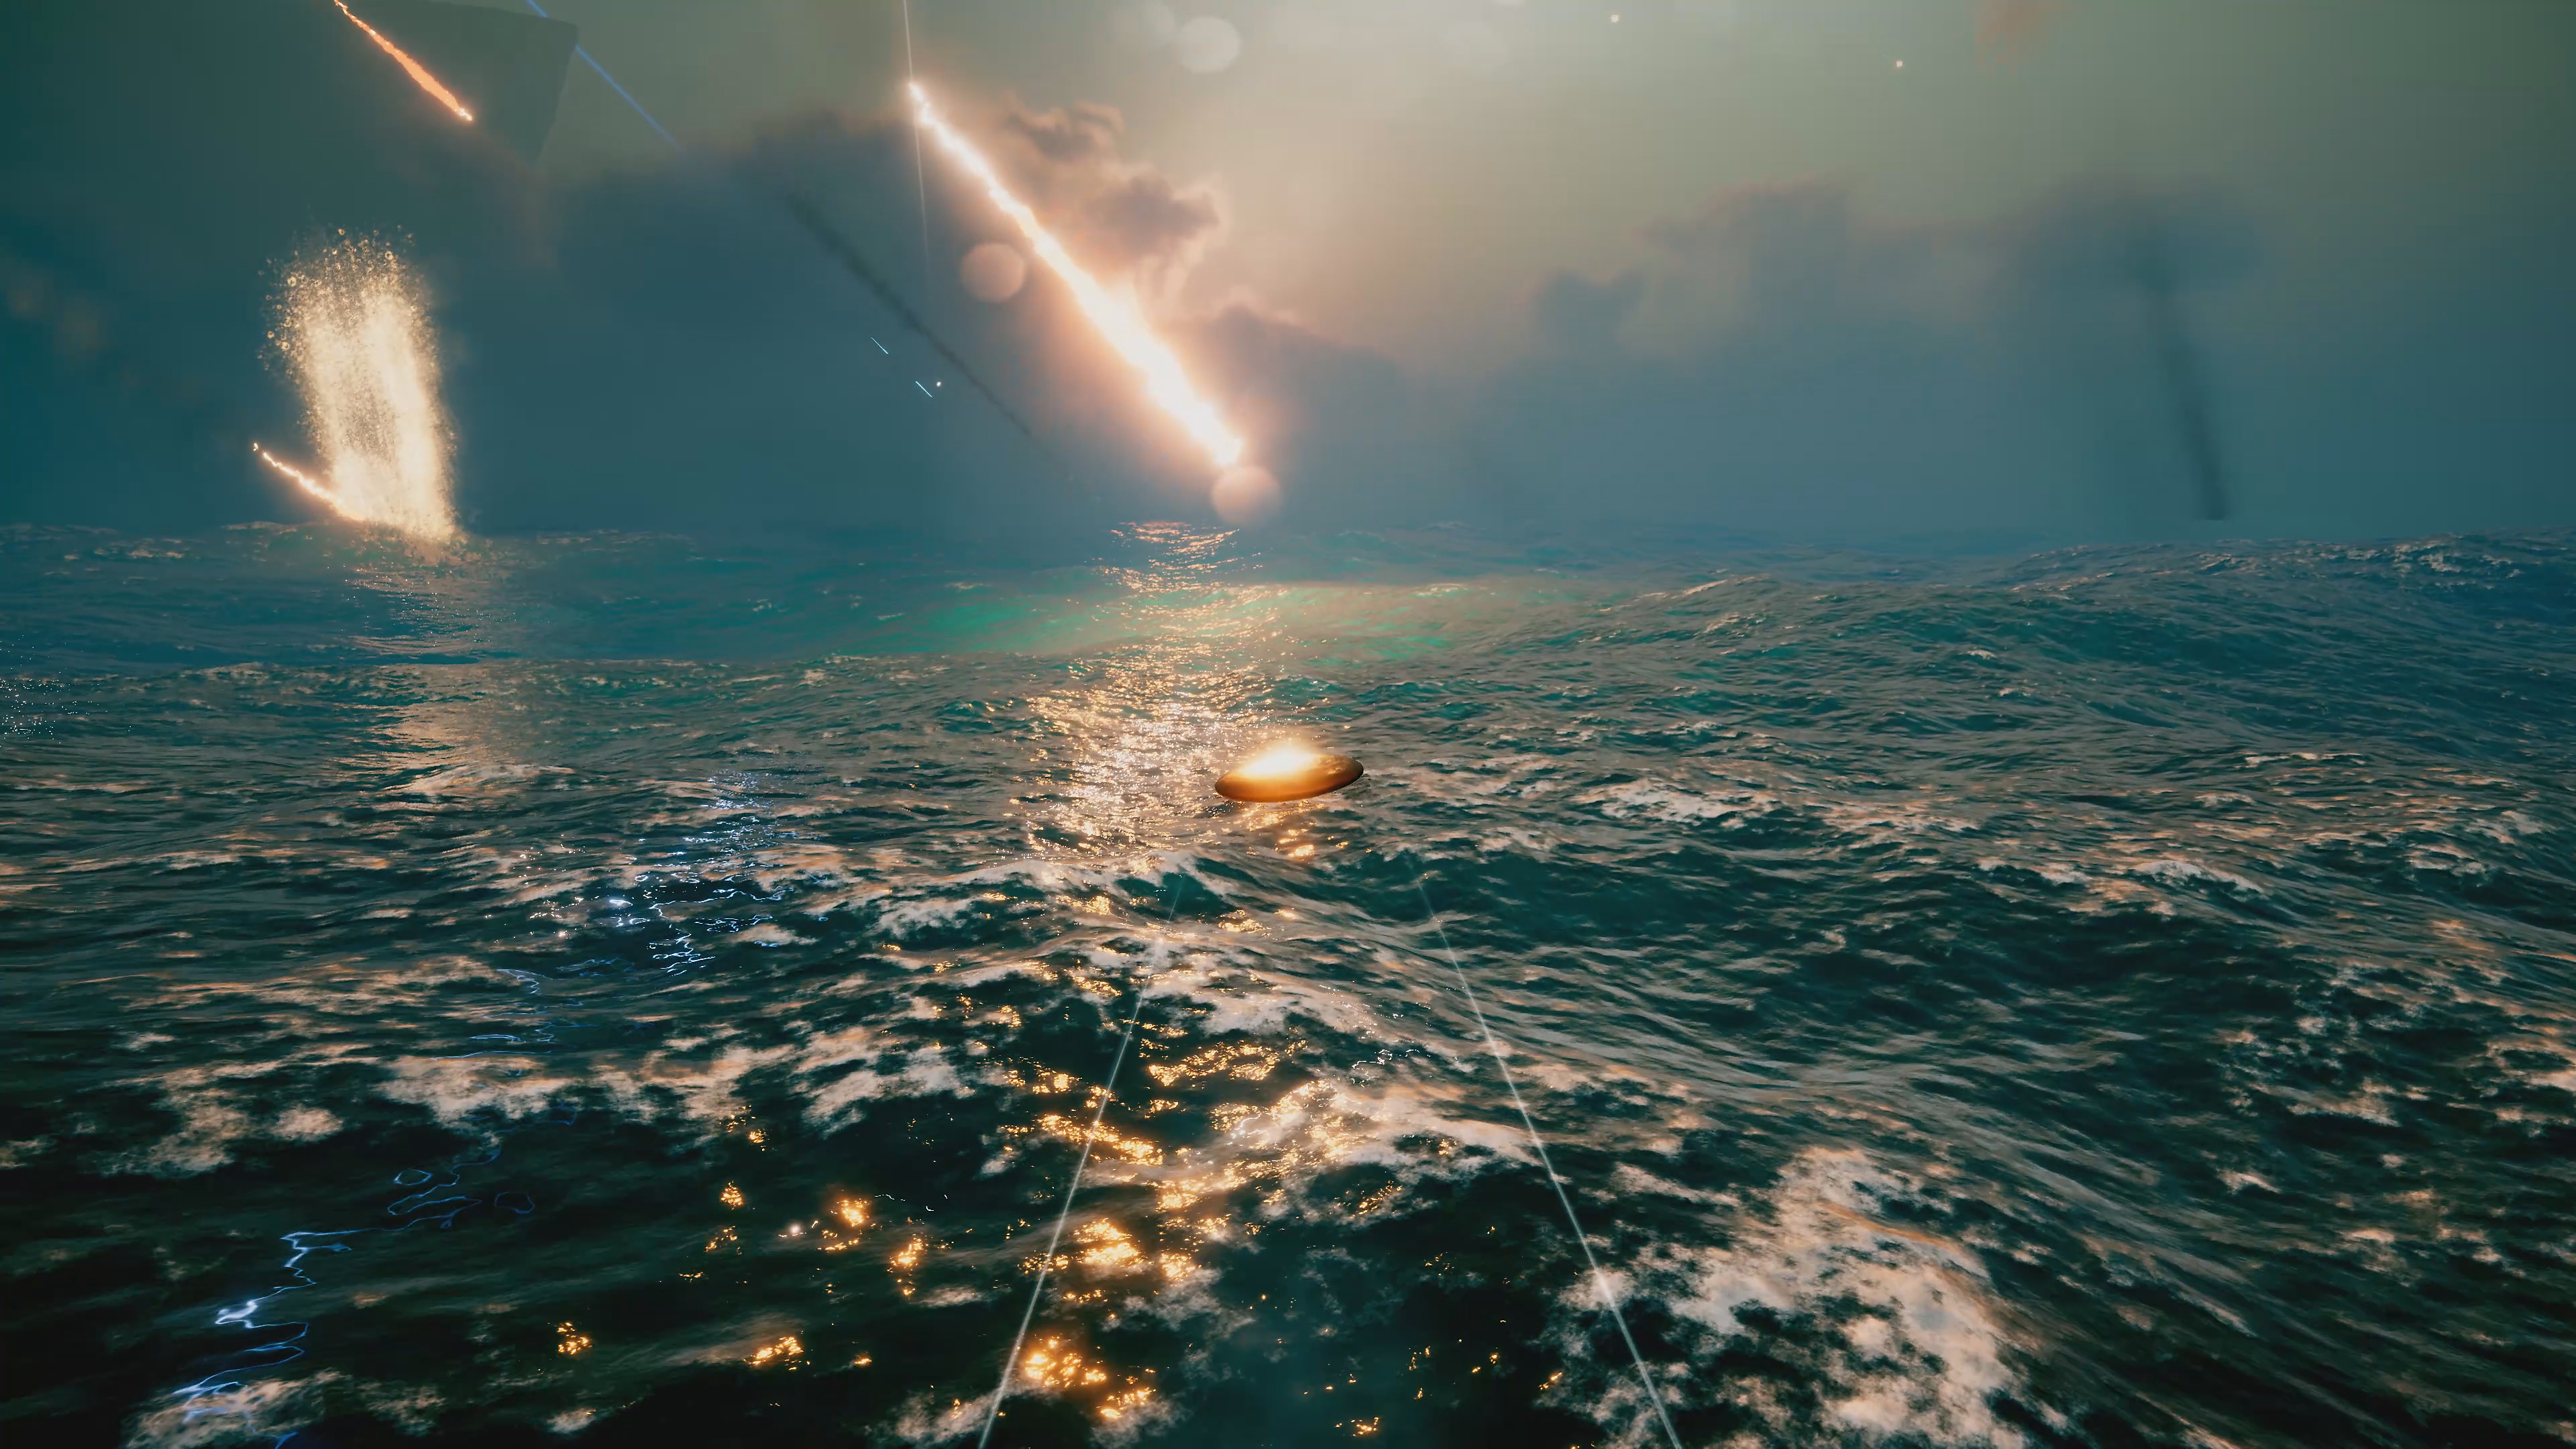 Exo One screenshot showing a flying object over an ocean